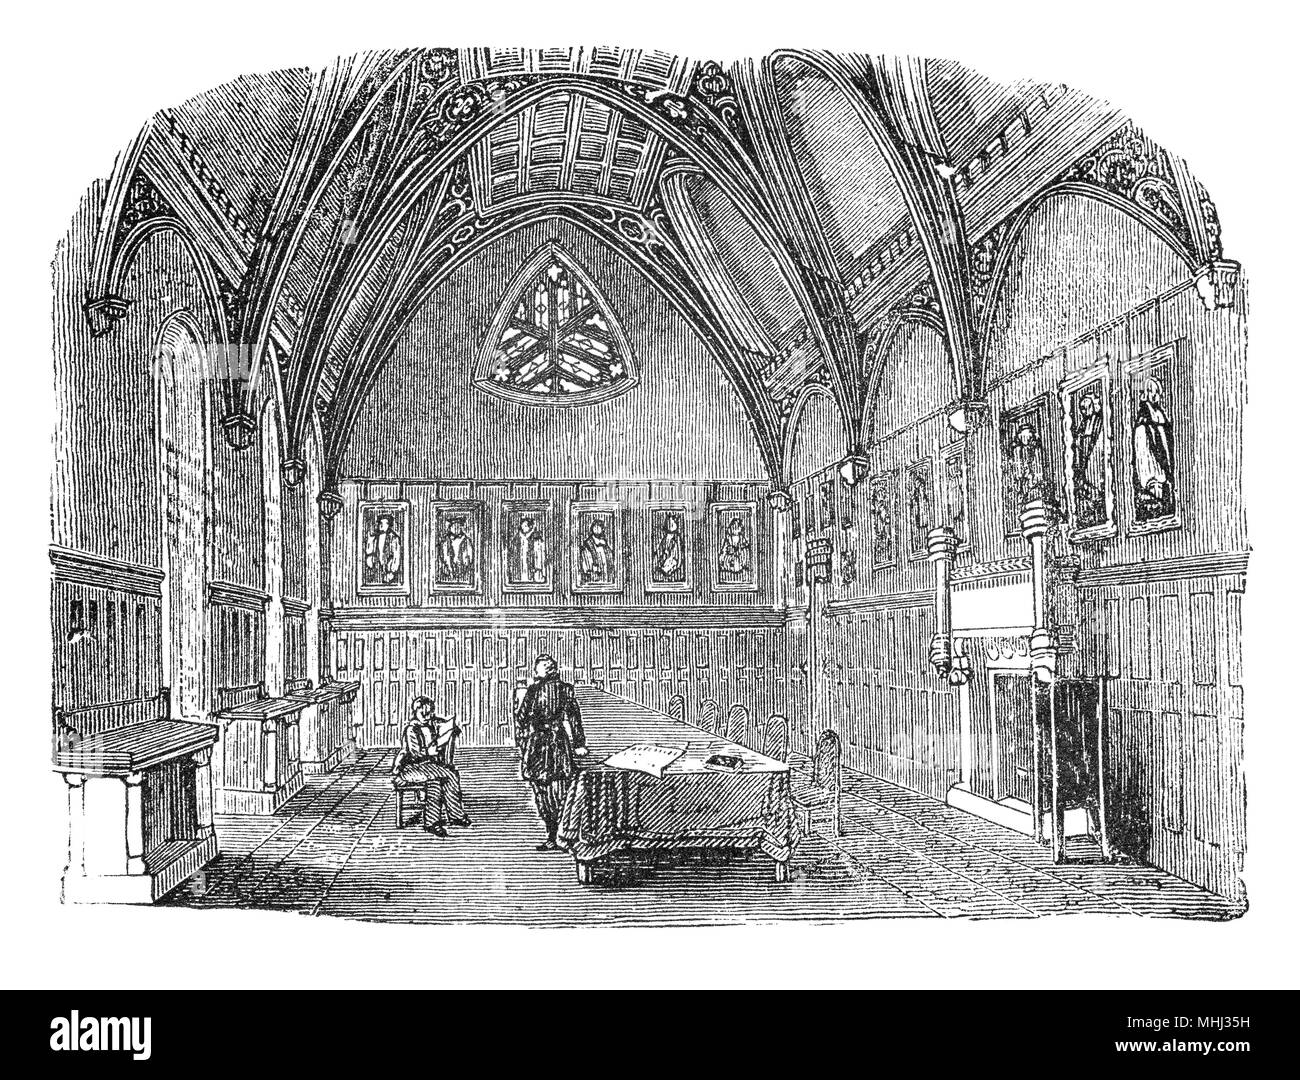 Interior view of the Guard Room at Lambeth Palace on the south bank of the River Thames, London, England. It formerly contained armour and arms for the defence of the Palace, but is now used as a state dining-room. The building, originally called the Manor of Lambeth or Lambeth House, has been – for nearly 800 years – the London residence of the Archbishop of Canterbury, whose original residence was in Canterbury, Kent. Stock Photo